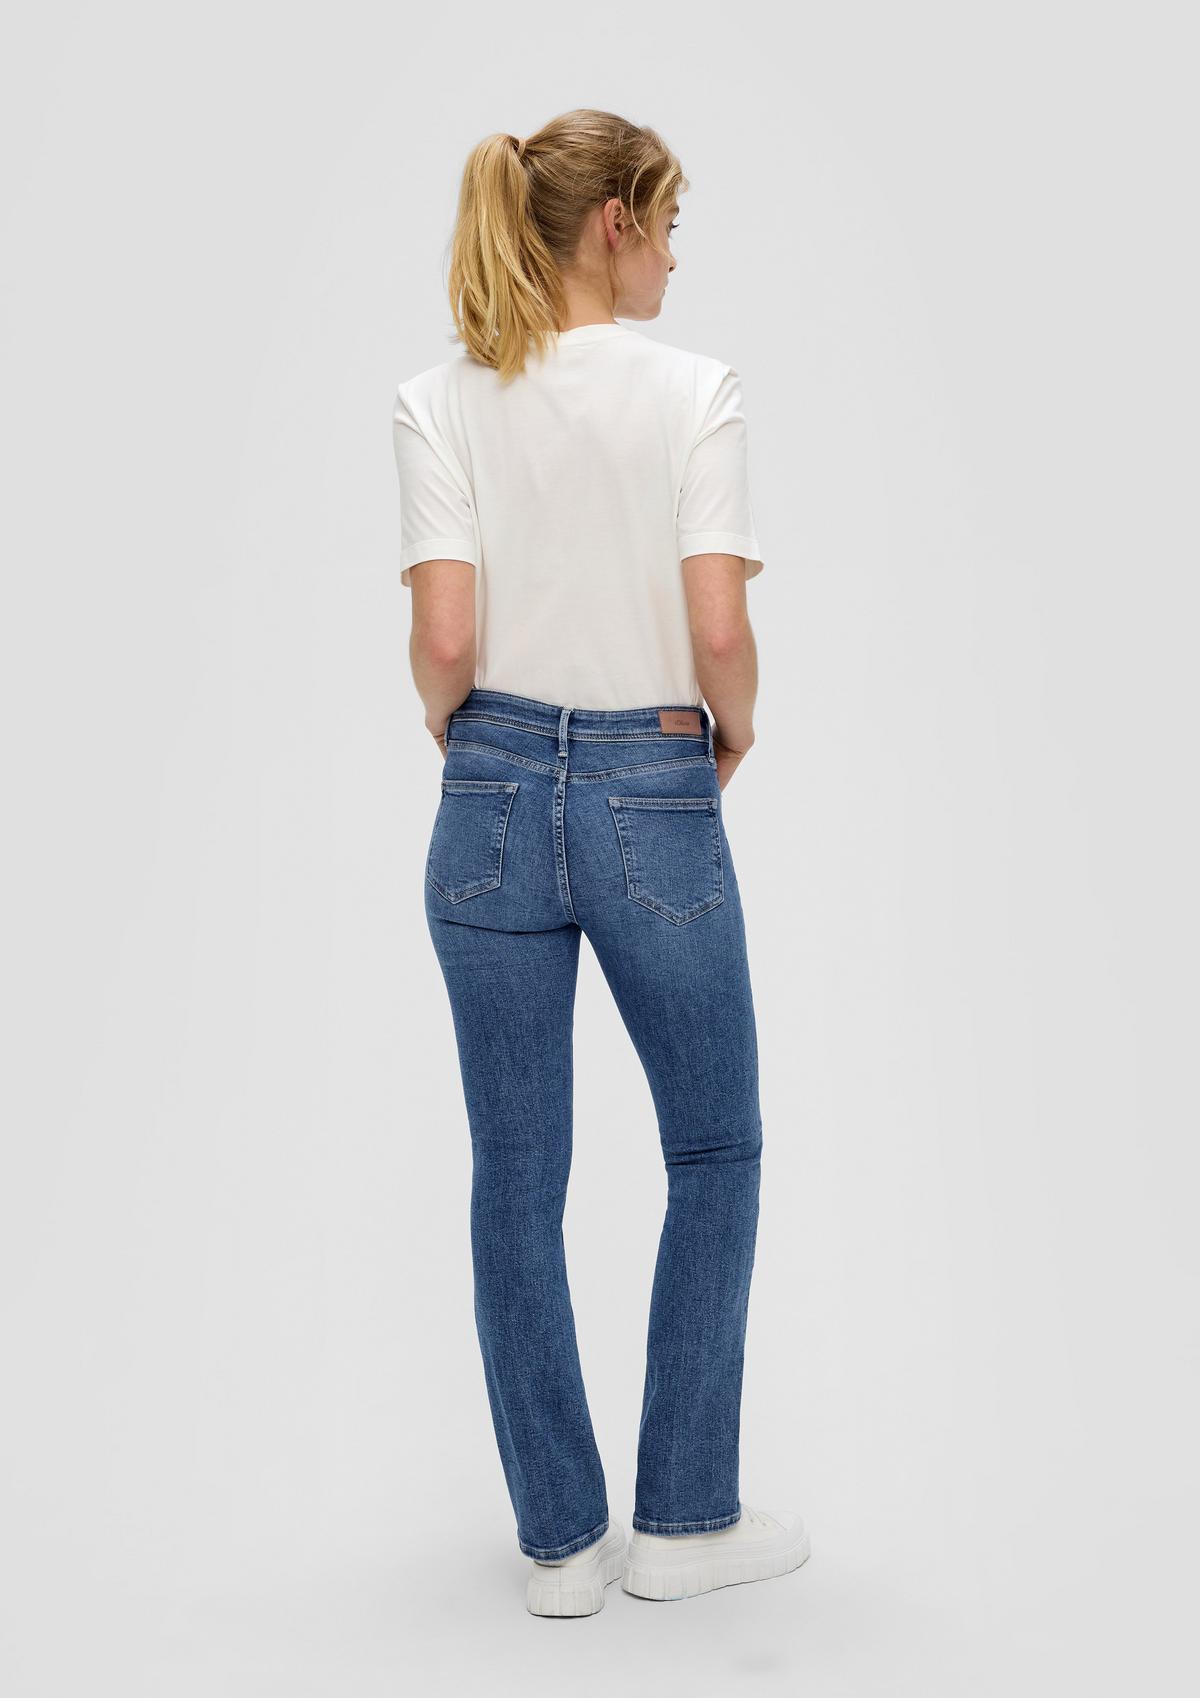 s.Oliver Jeans Beverly / Slim Fit / taille mi-haute / Bootcut Leg